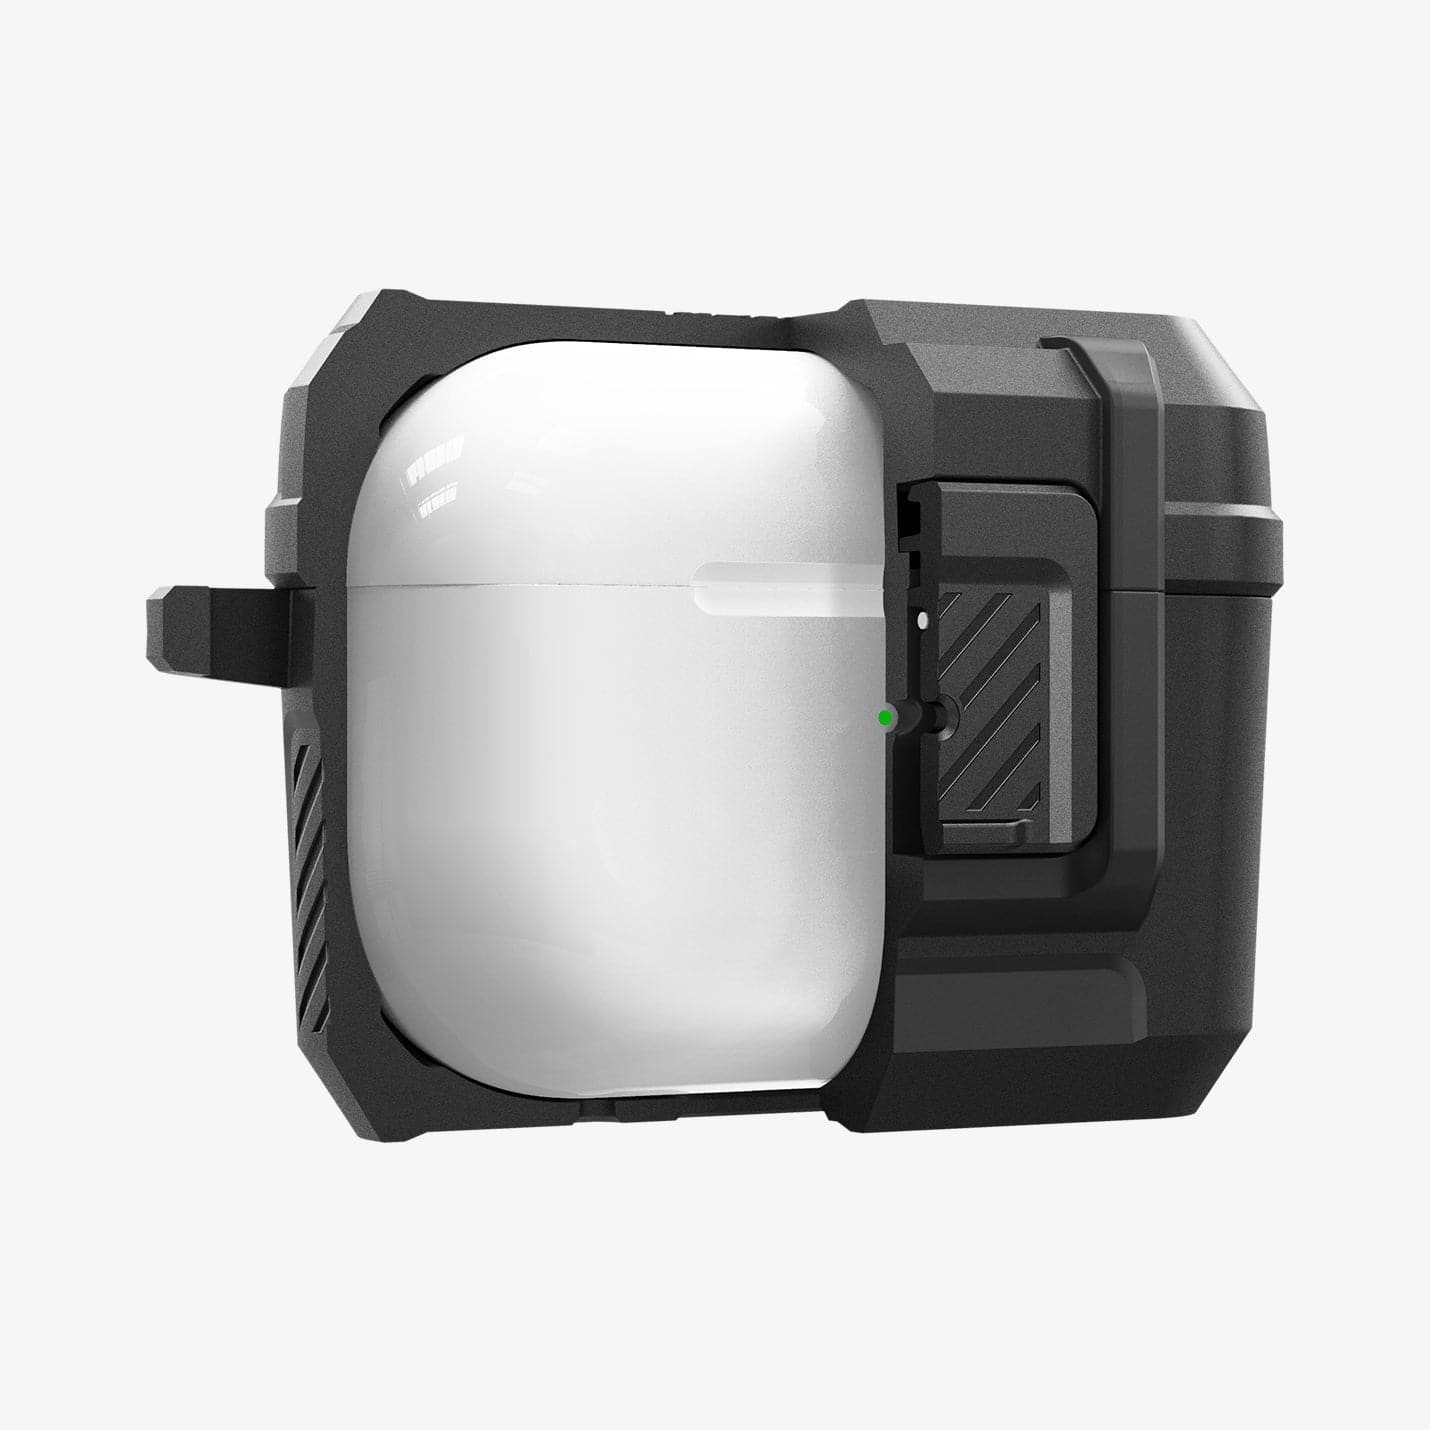 ACS05485 - Apple AirPods Pro 2 Case Lock Fit in matte black showing the front with case half cut open